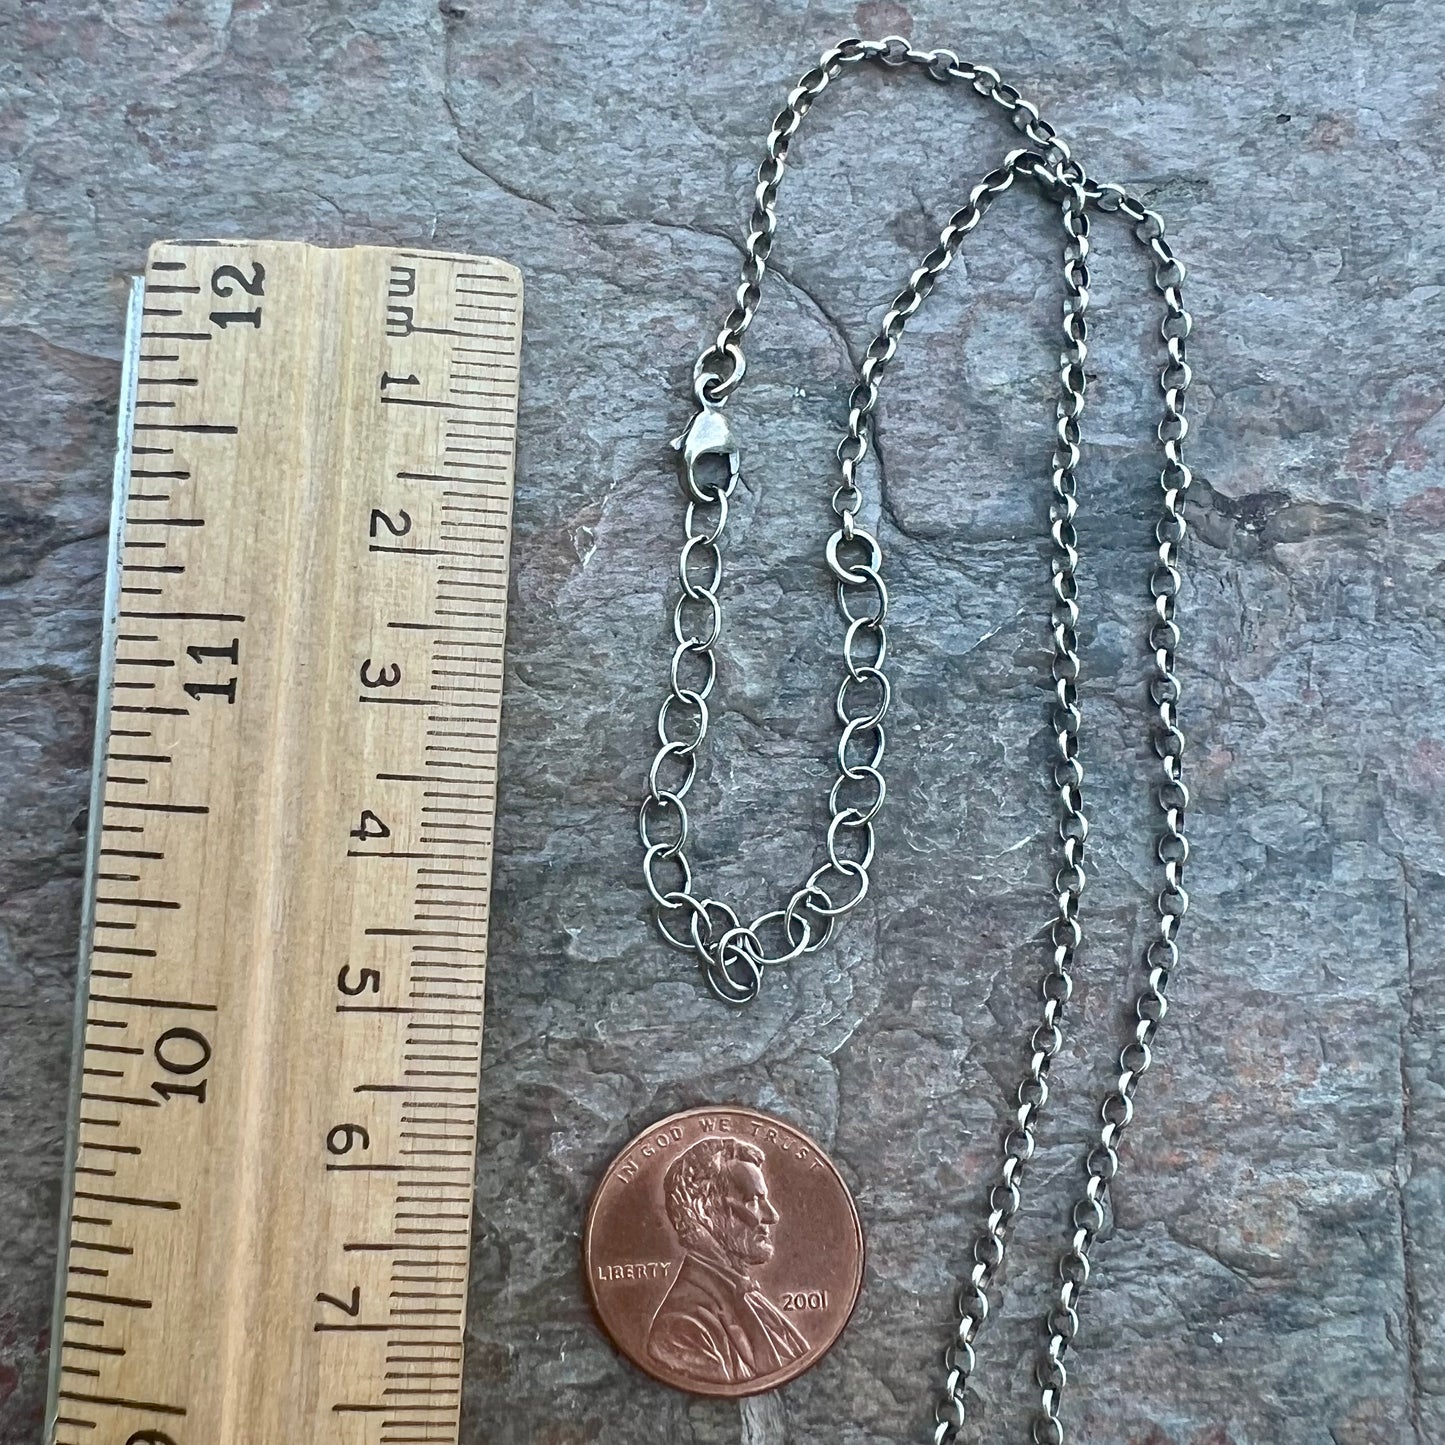 Sterling Silver Chain  - Adjustable Lightweight Cable Chain with Extender